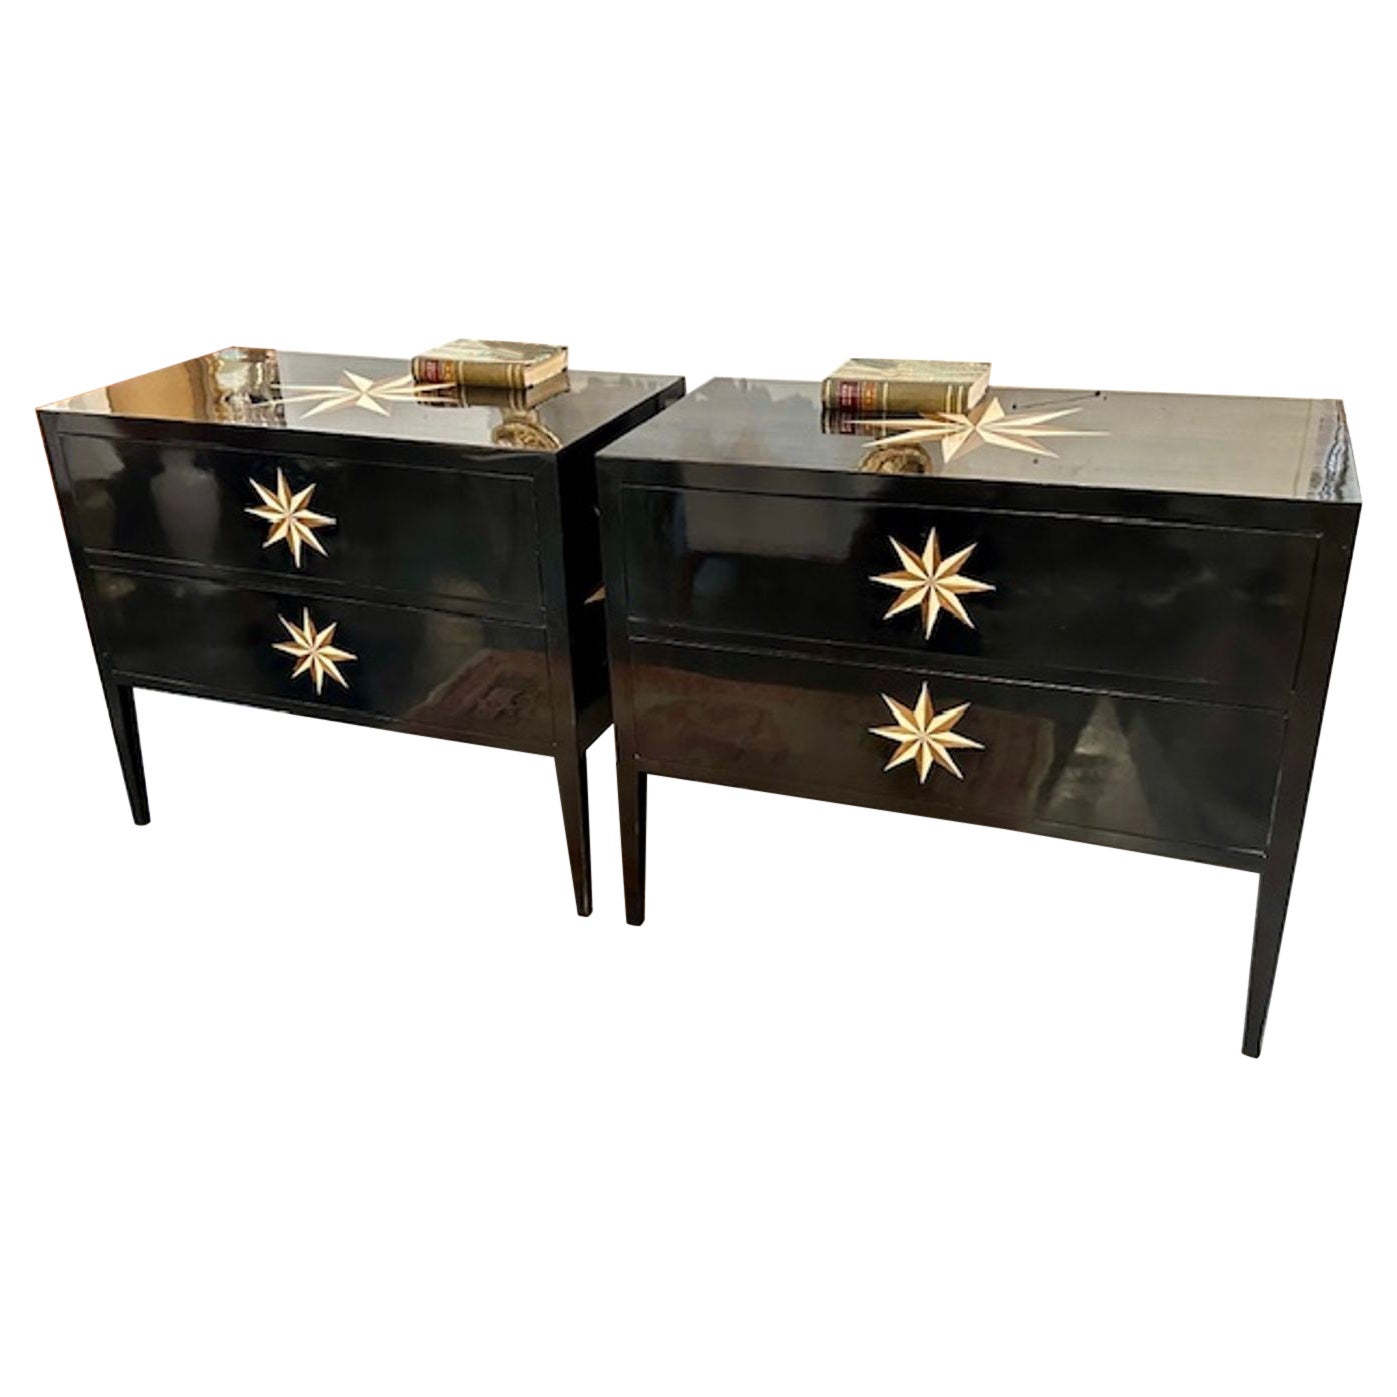 Pair of Black Lacquered Chests with Inlaid Star Pattern For Sale